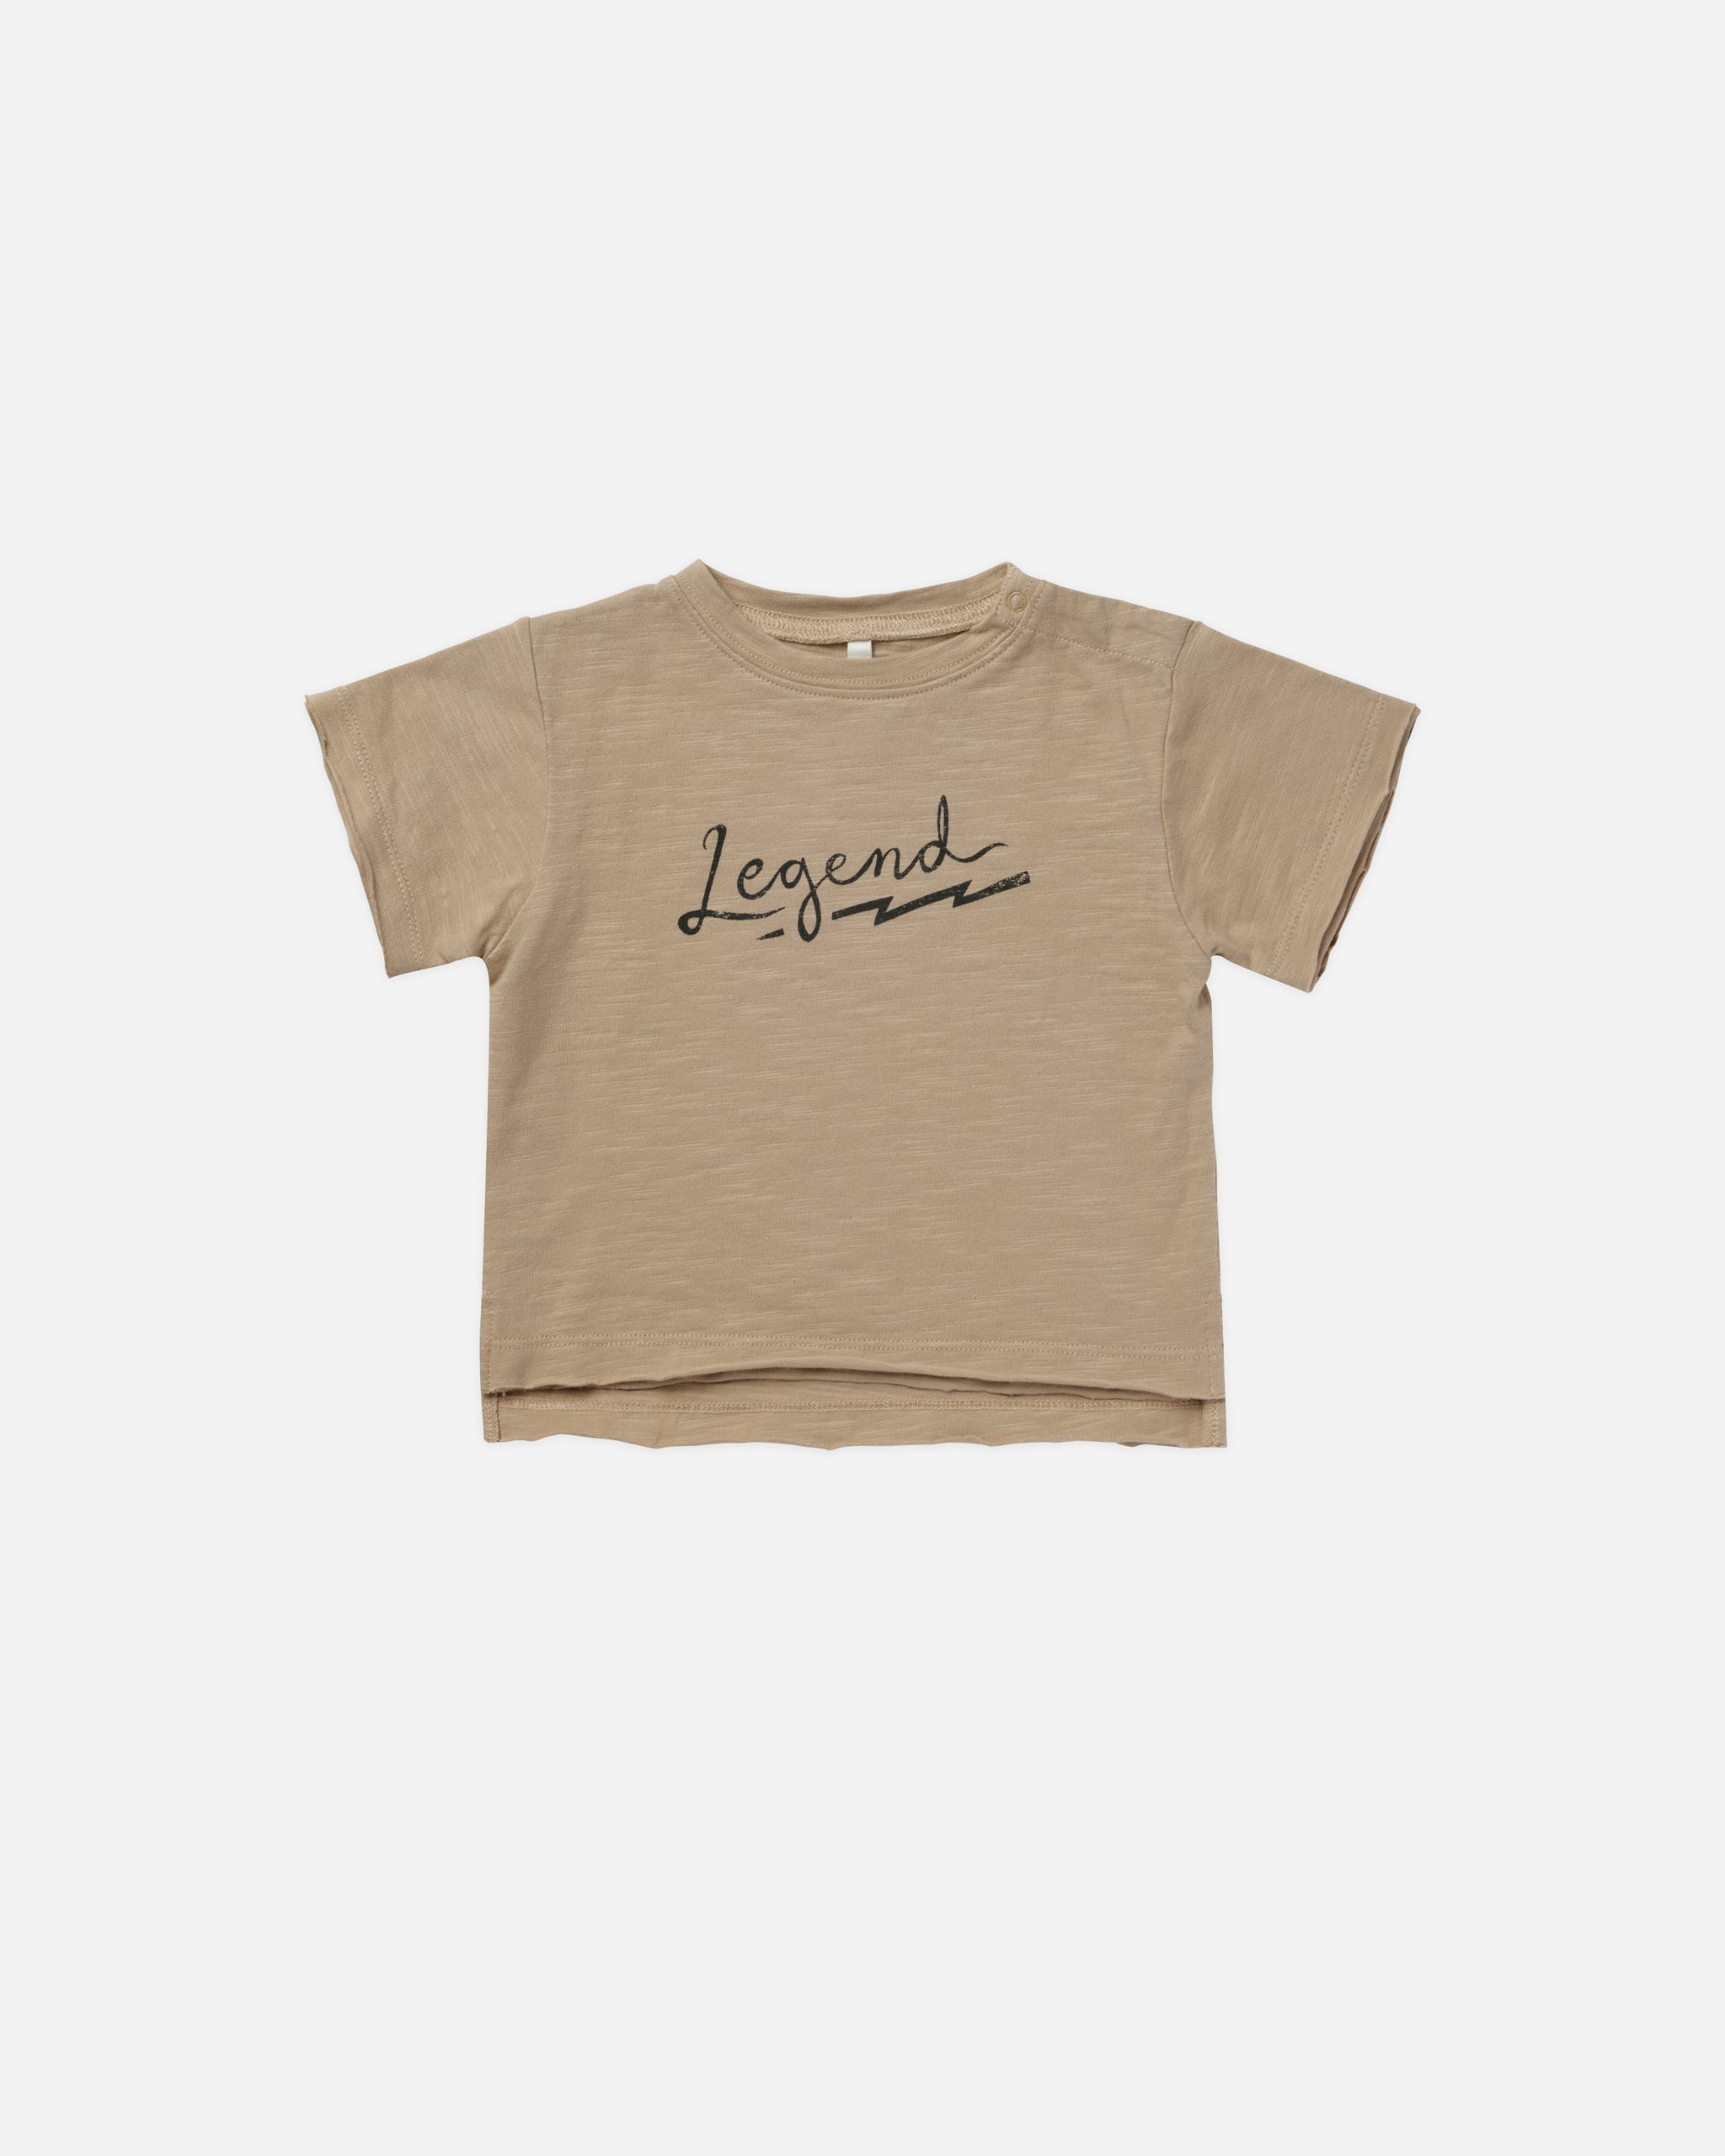 Raw Edge Tee || Legend - Rylee + Cru | Kids Clothes | Trendy Baby Clothes | Modern Infant Outfits |